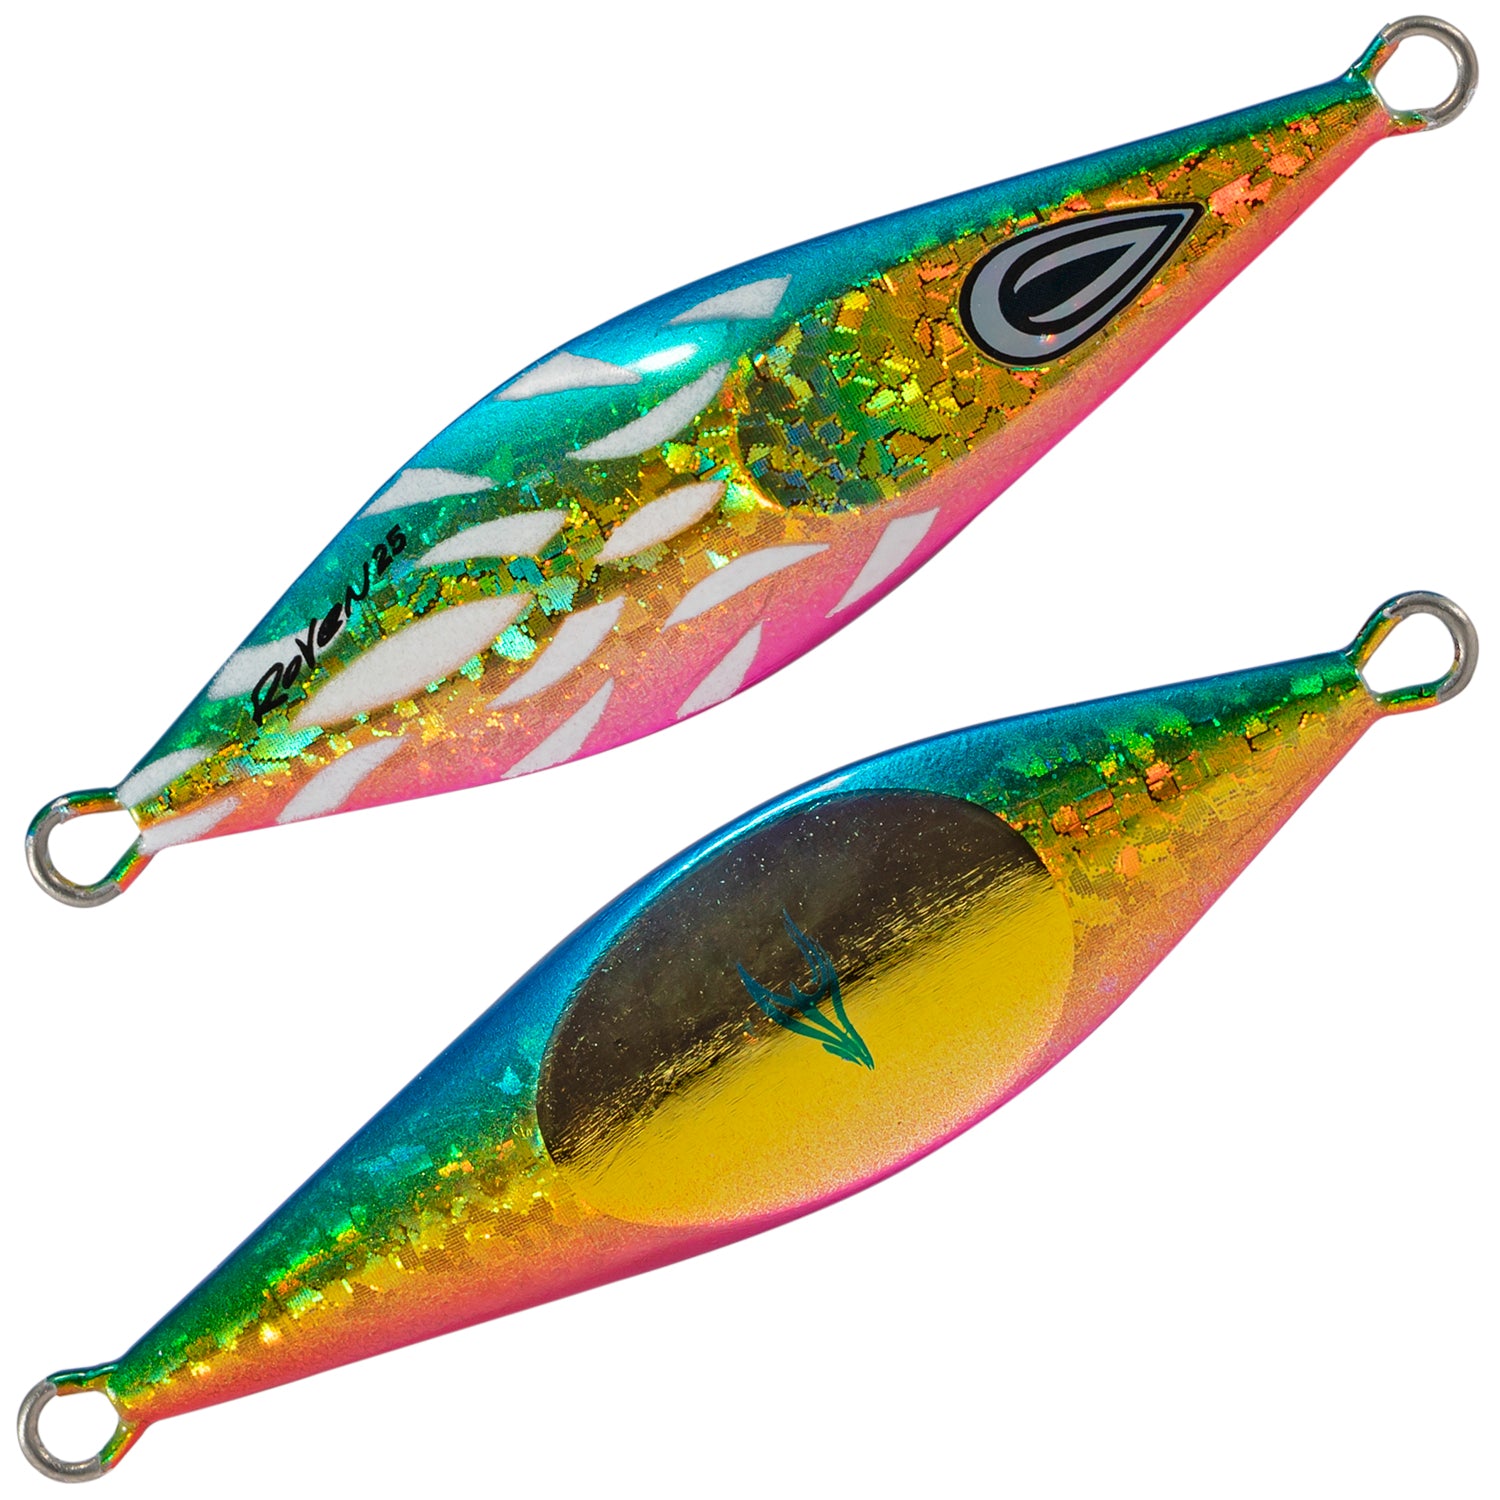 Oceans Legacy Roven Jig Rigged 10g 2